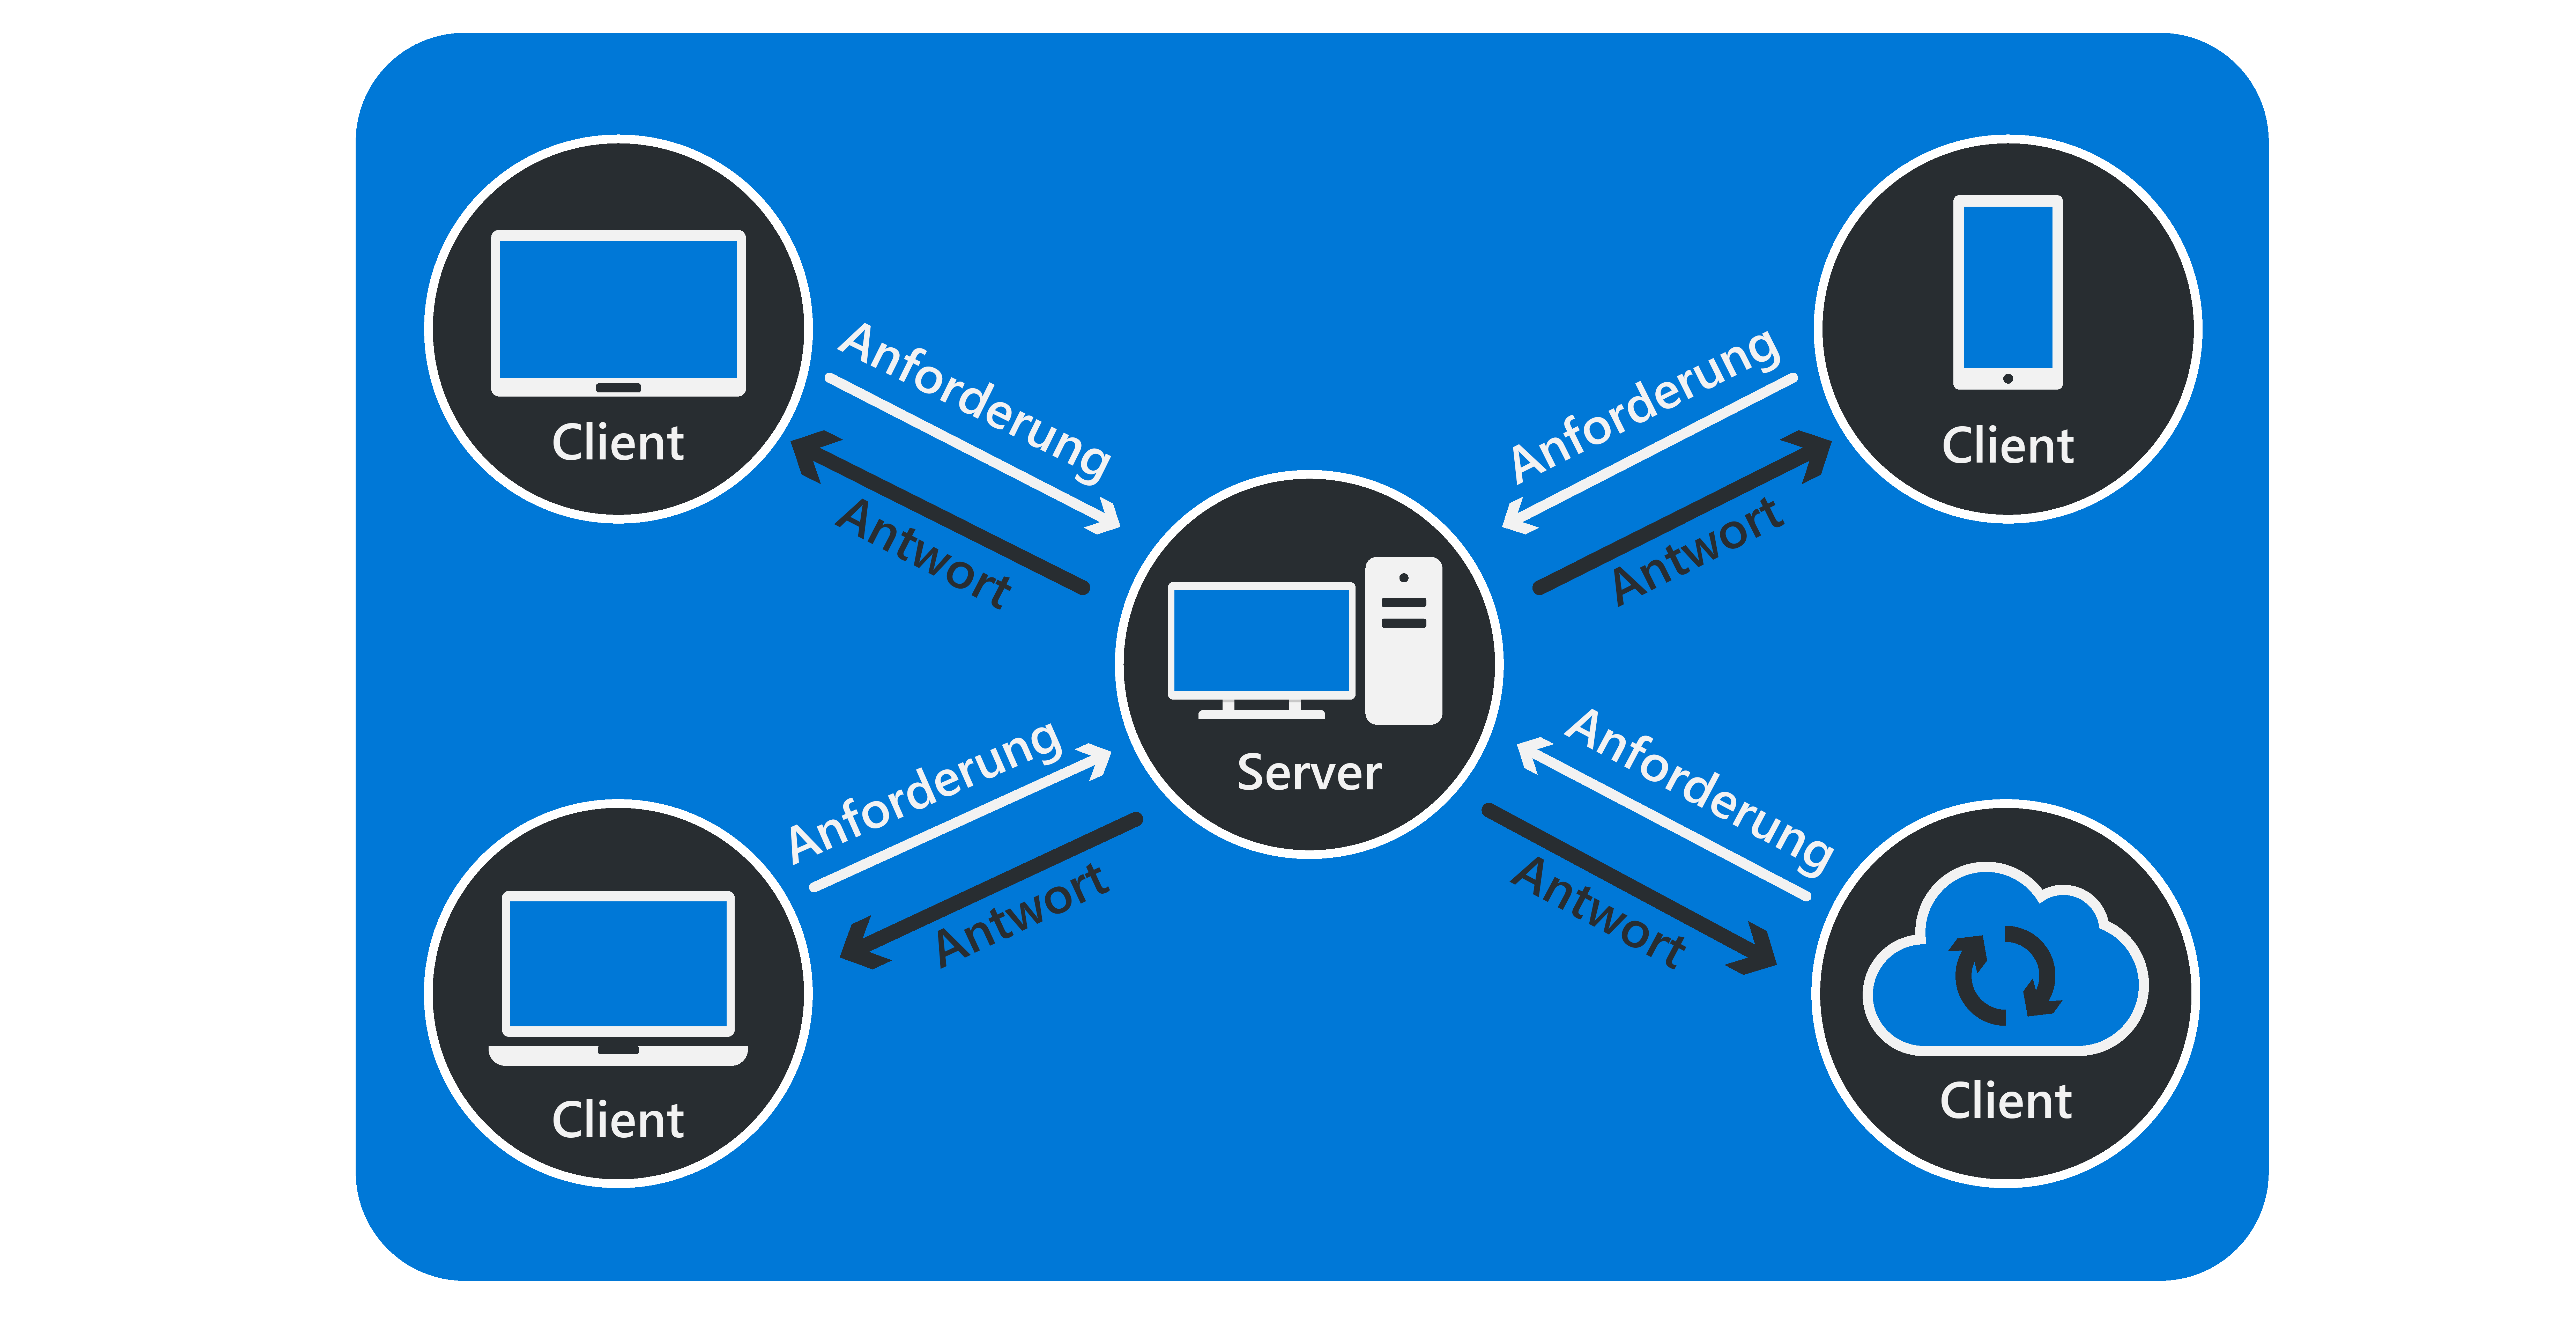 A diagram that shows a simple rendering of the client server with different client devices connecting a central server.